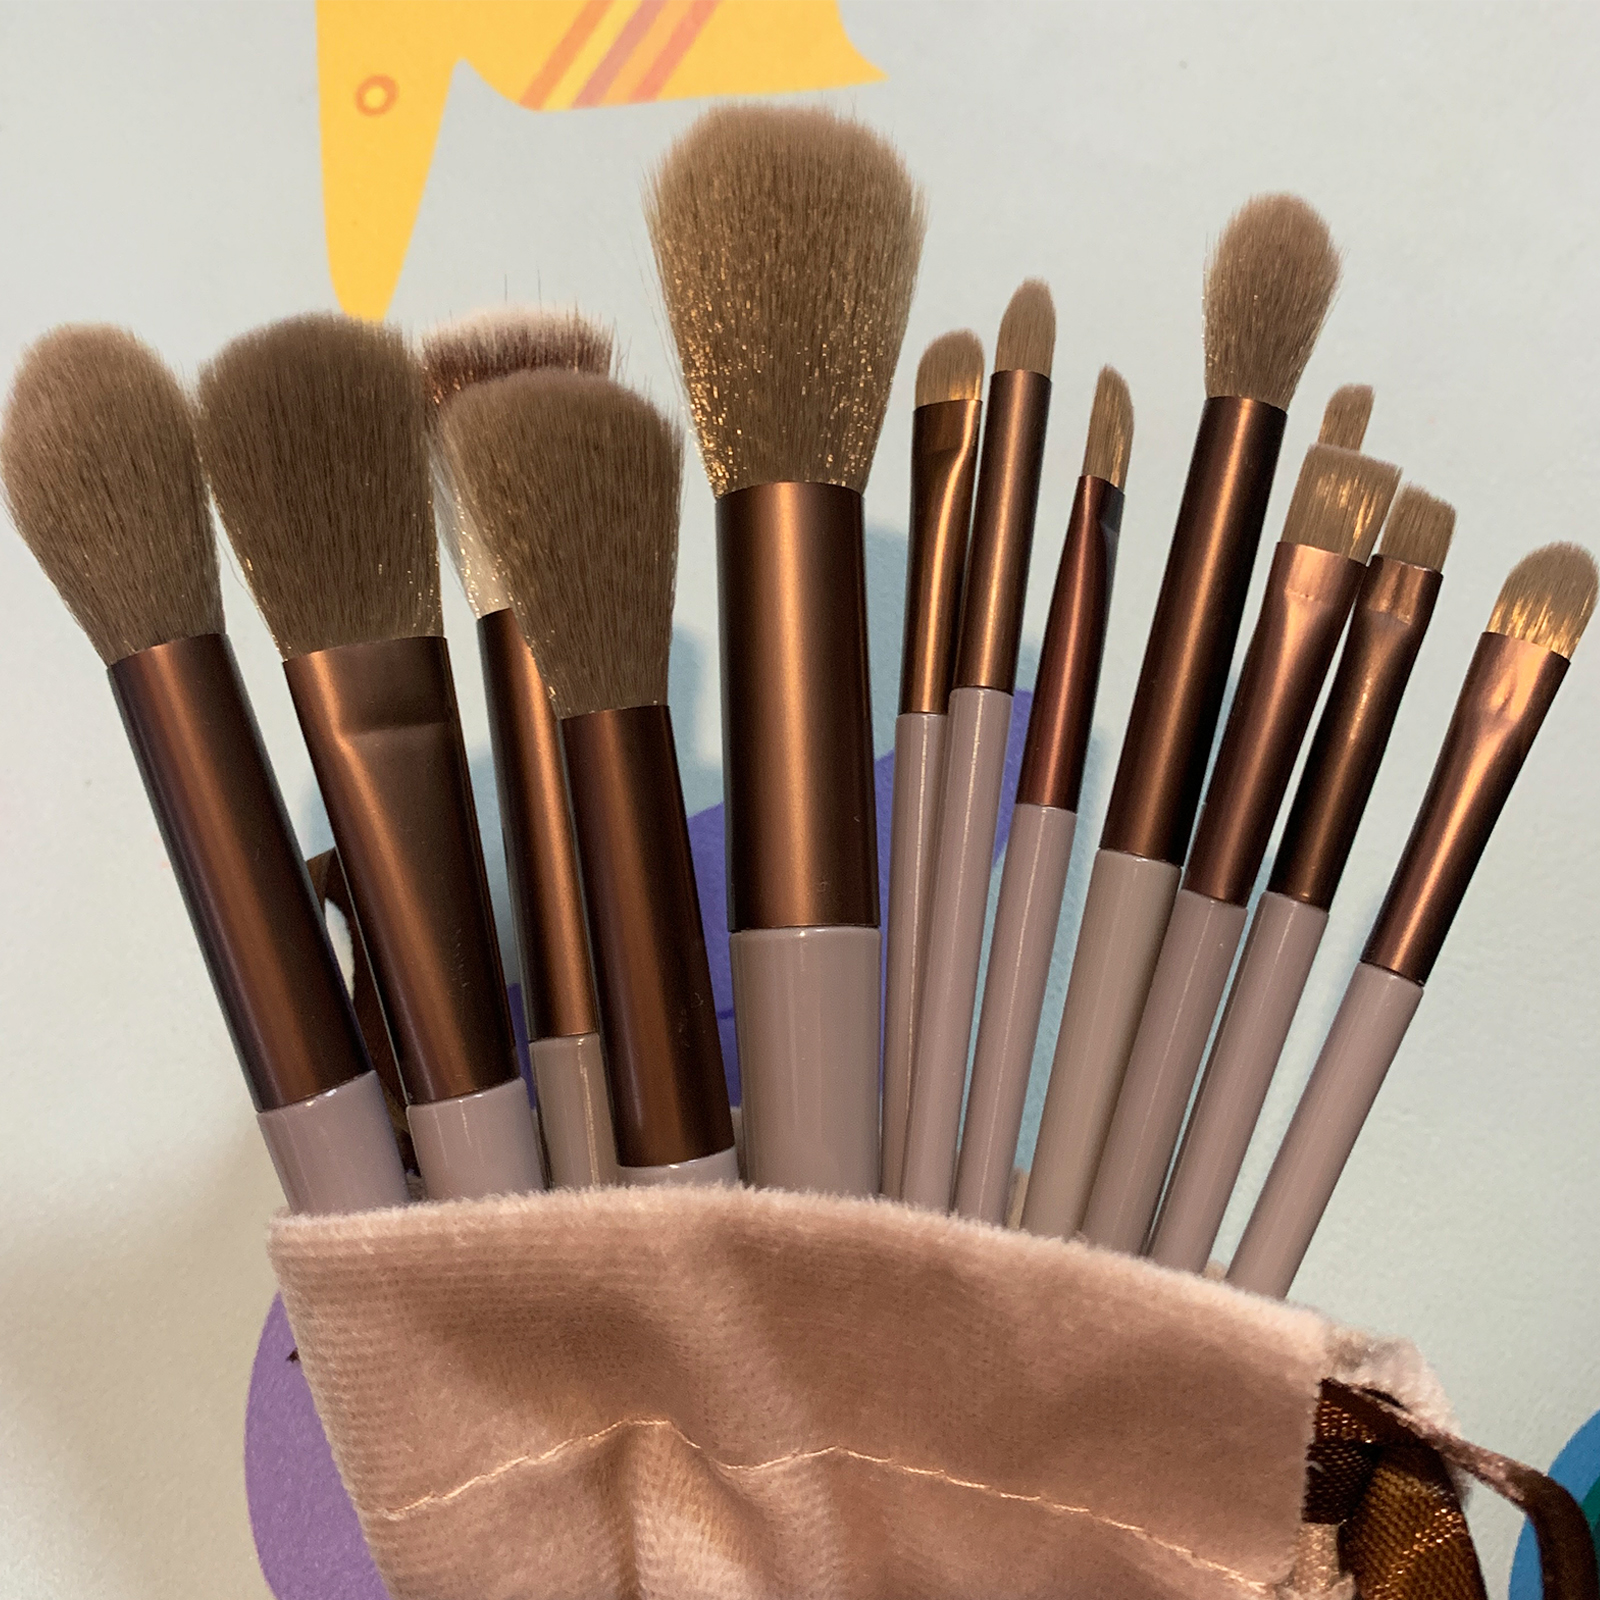 13 pcs Professional Makeup Brush Set - Includes Eyeshadow, Blush, and Contour Brushes for Flawless Application